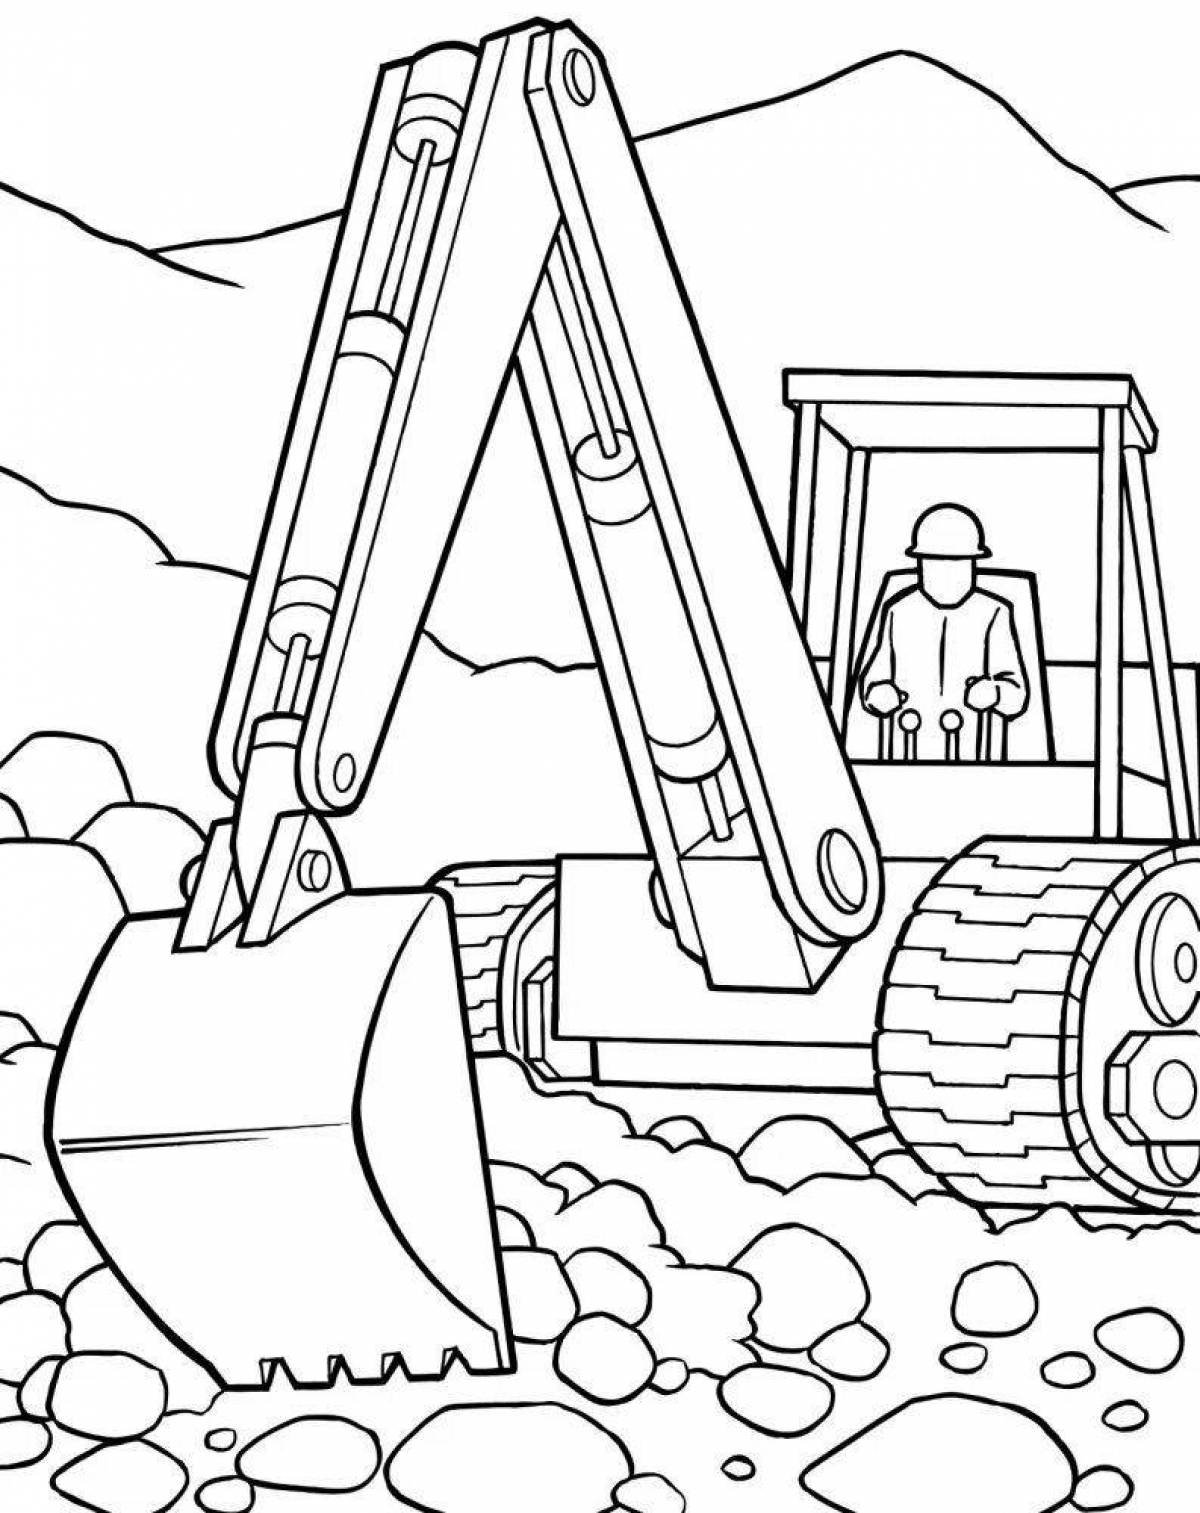 Fun coloring of construction vehicles